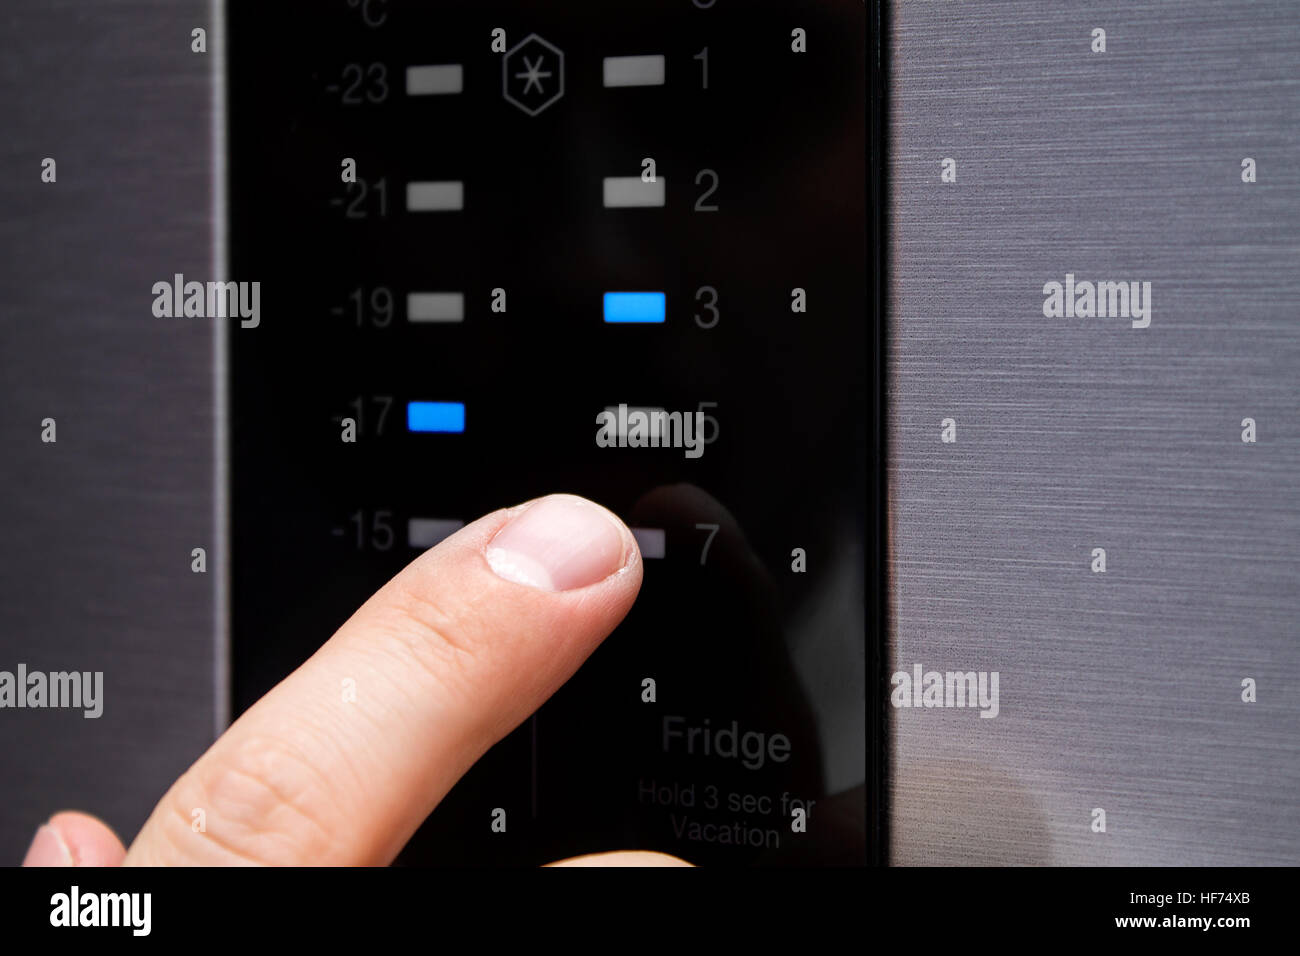 https://c8.alamy.com/comp/HF74XB/man-sets-the-temperature-in-the-modern-refrigerator-on-touch-panel-HF74XB.jpg